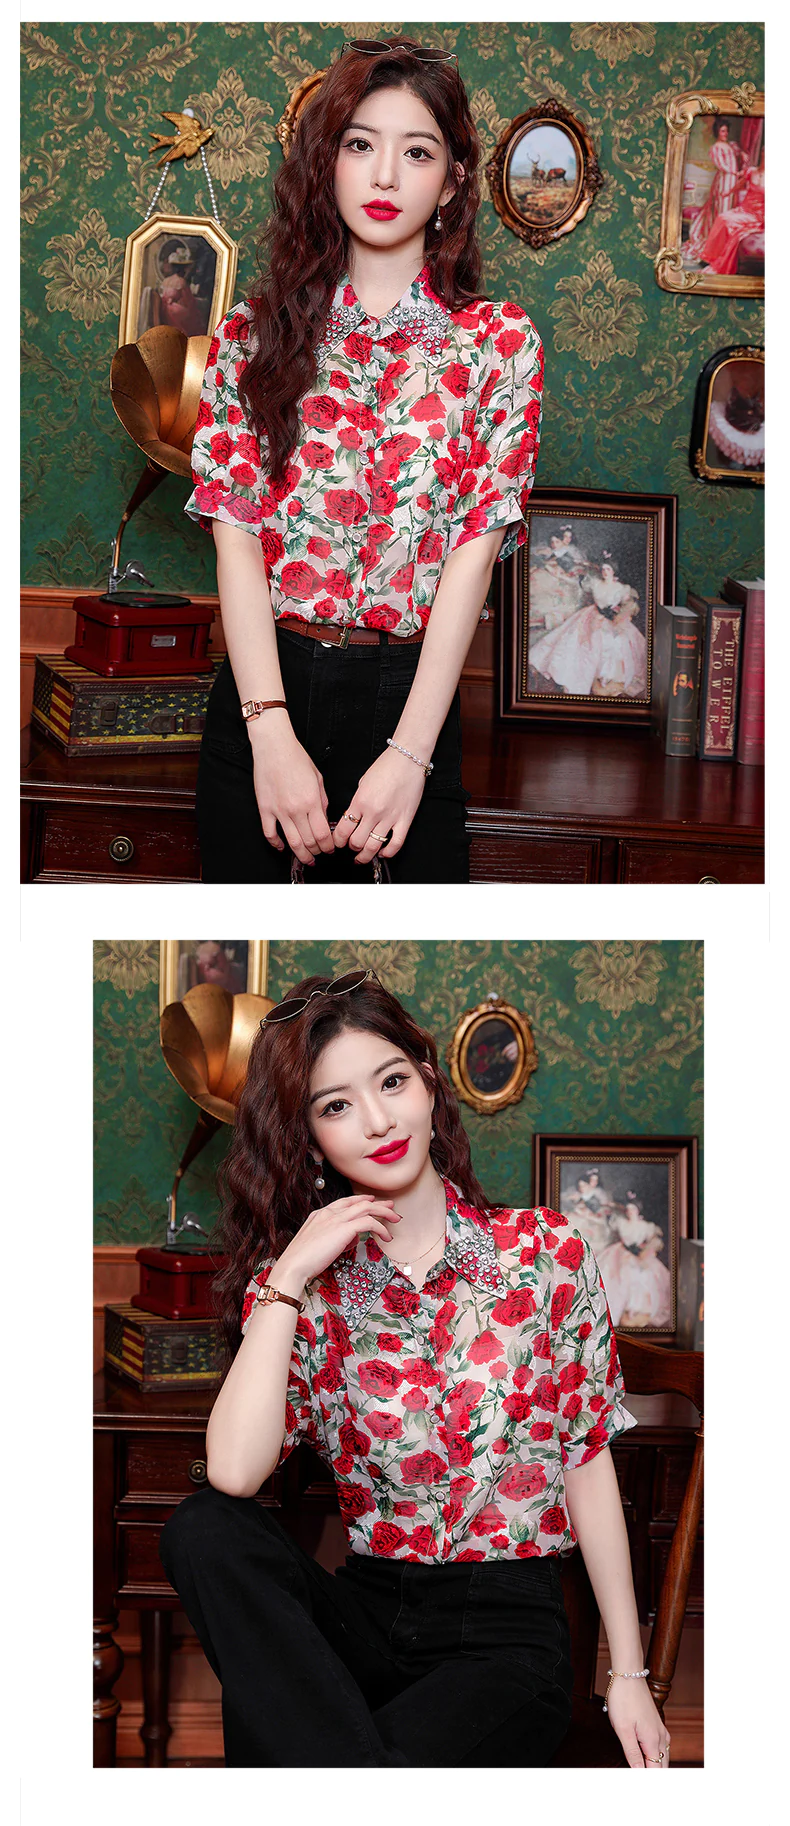 Womens-Fashionable-Red-Floral-Printed-Chiffon-Casual-Shirt-Blouse14